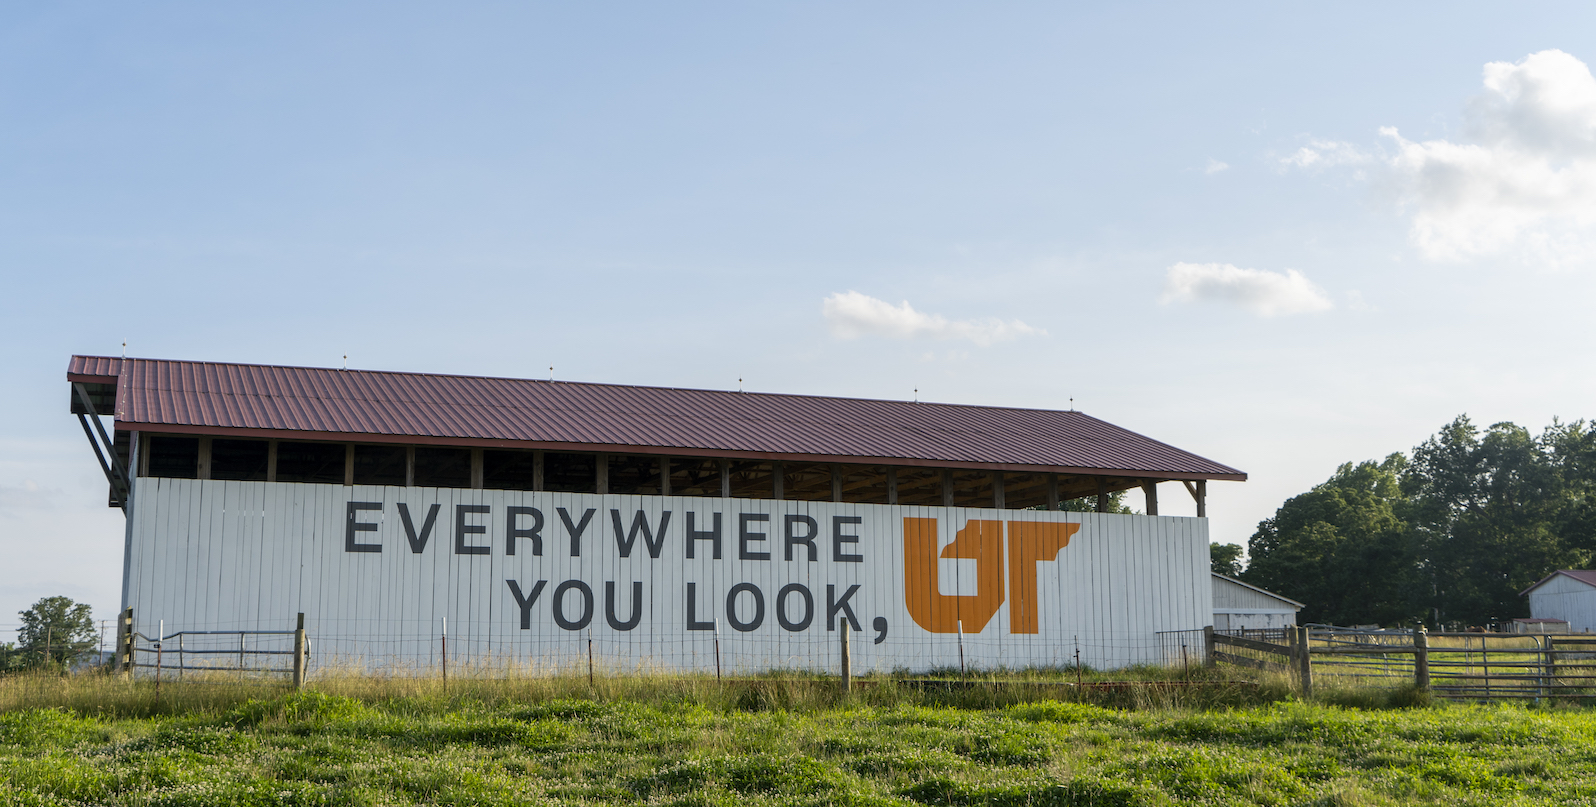 Image of the 15th mural in the Everywhere UT campaign, in Crossville, TN.